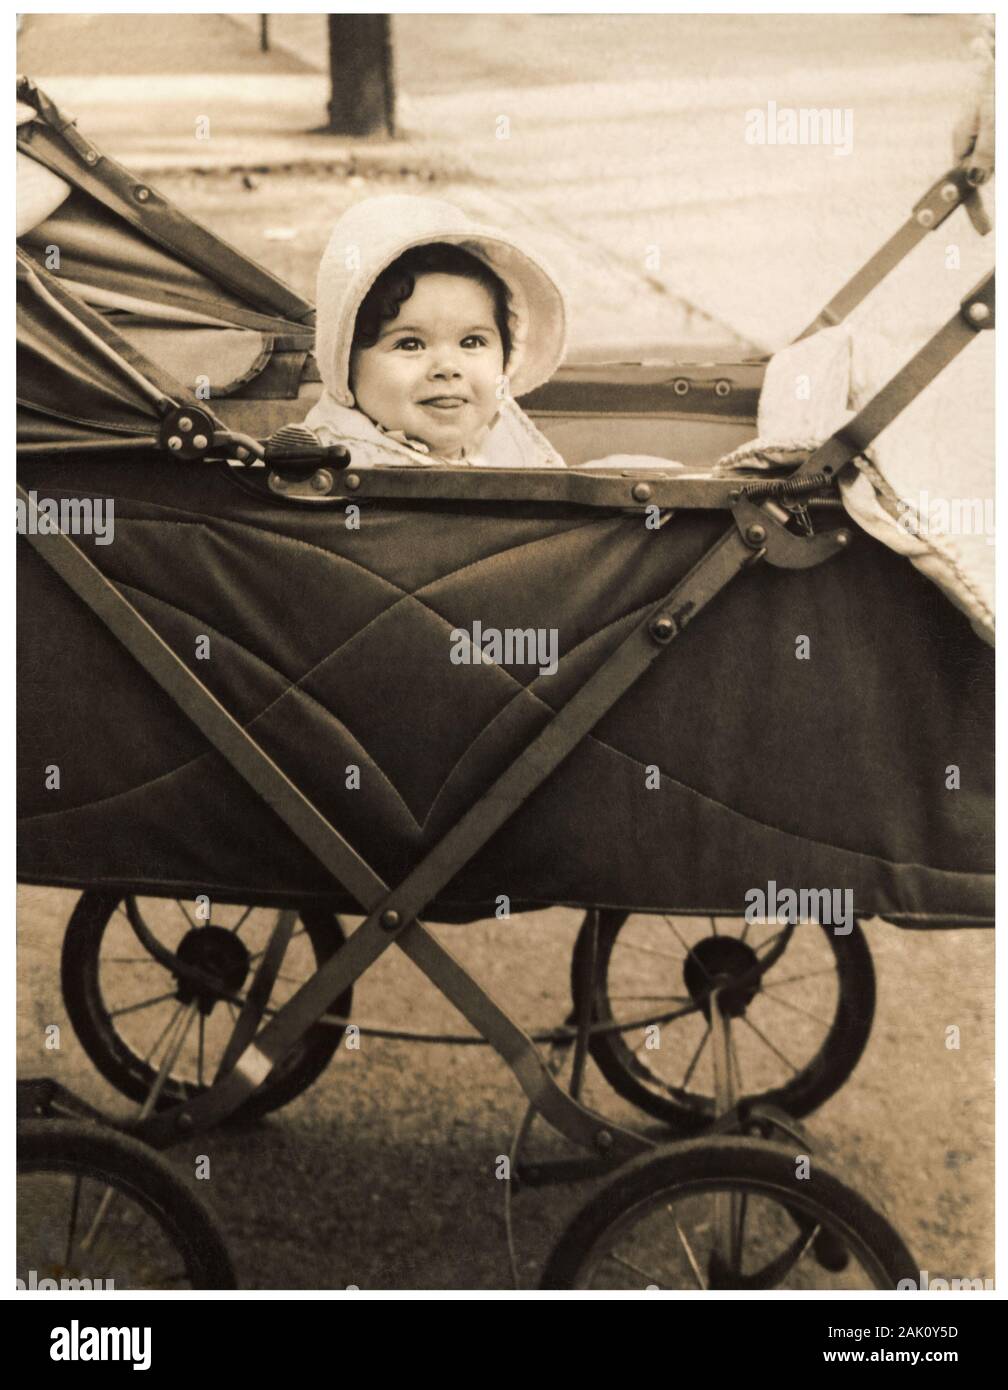 1950's baby and carriage Stock Photo